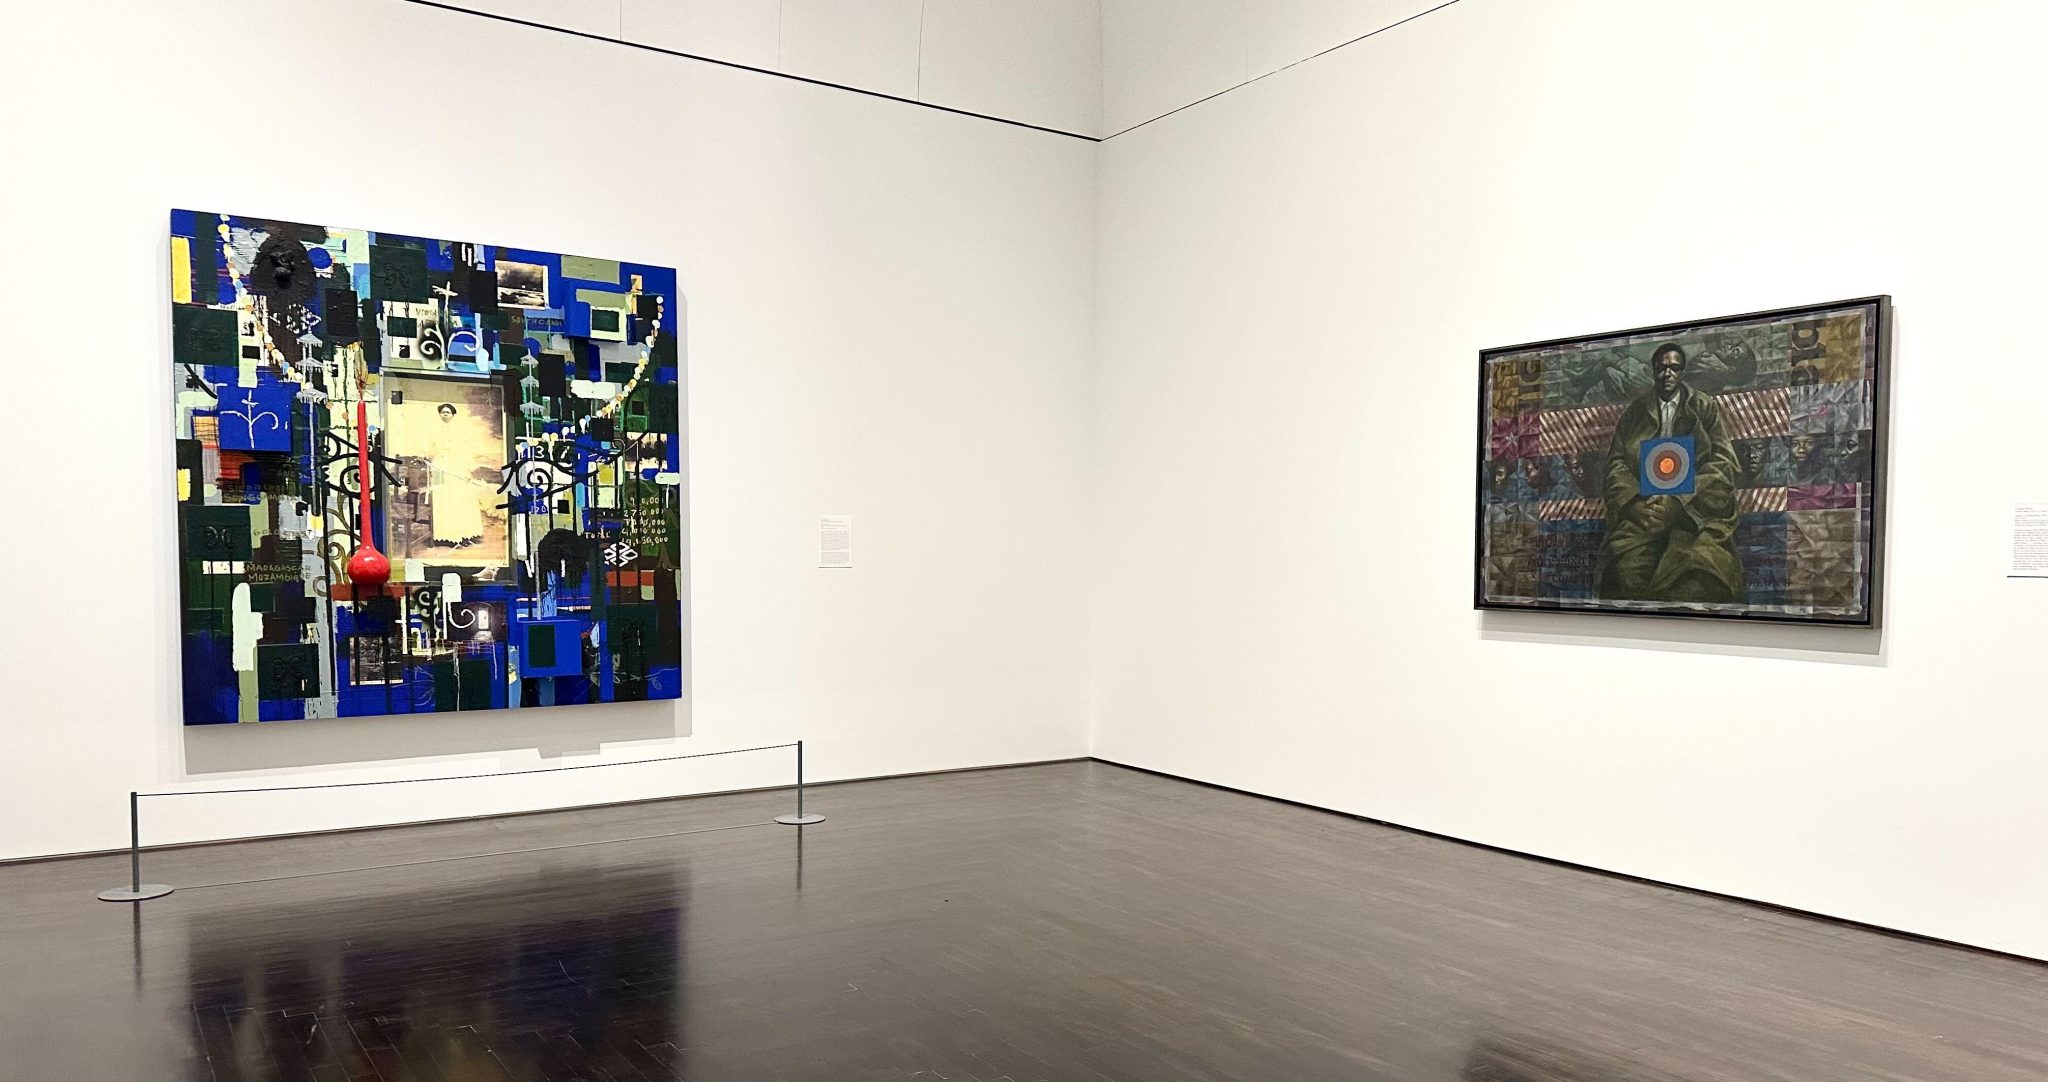 Two large works of art in a gallery